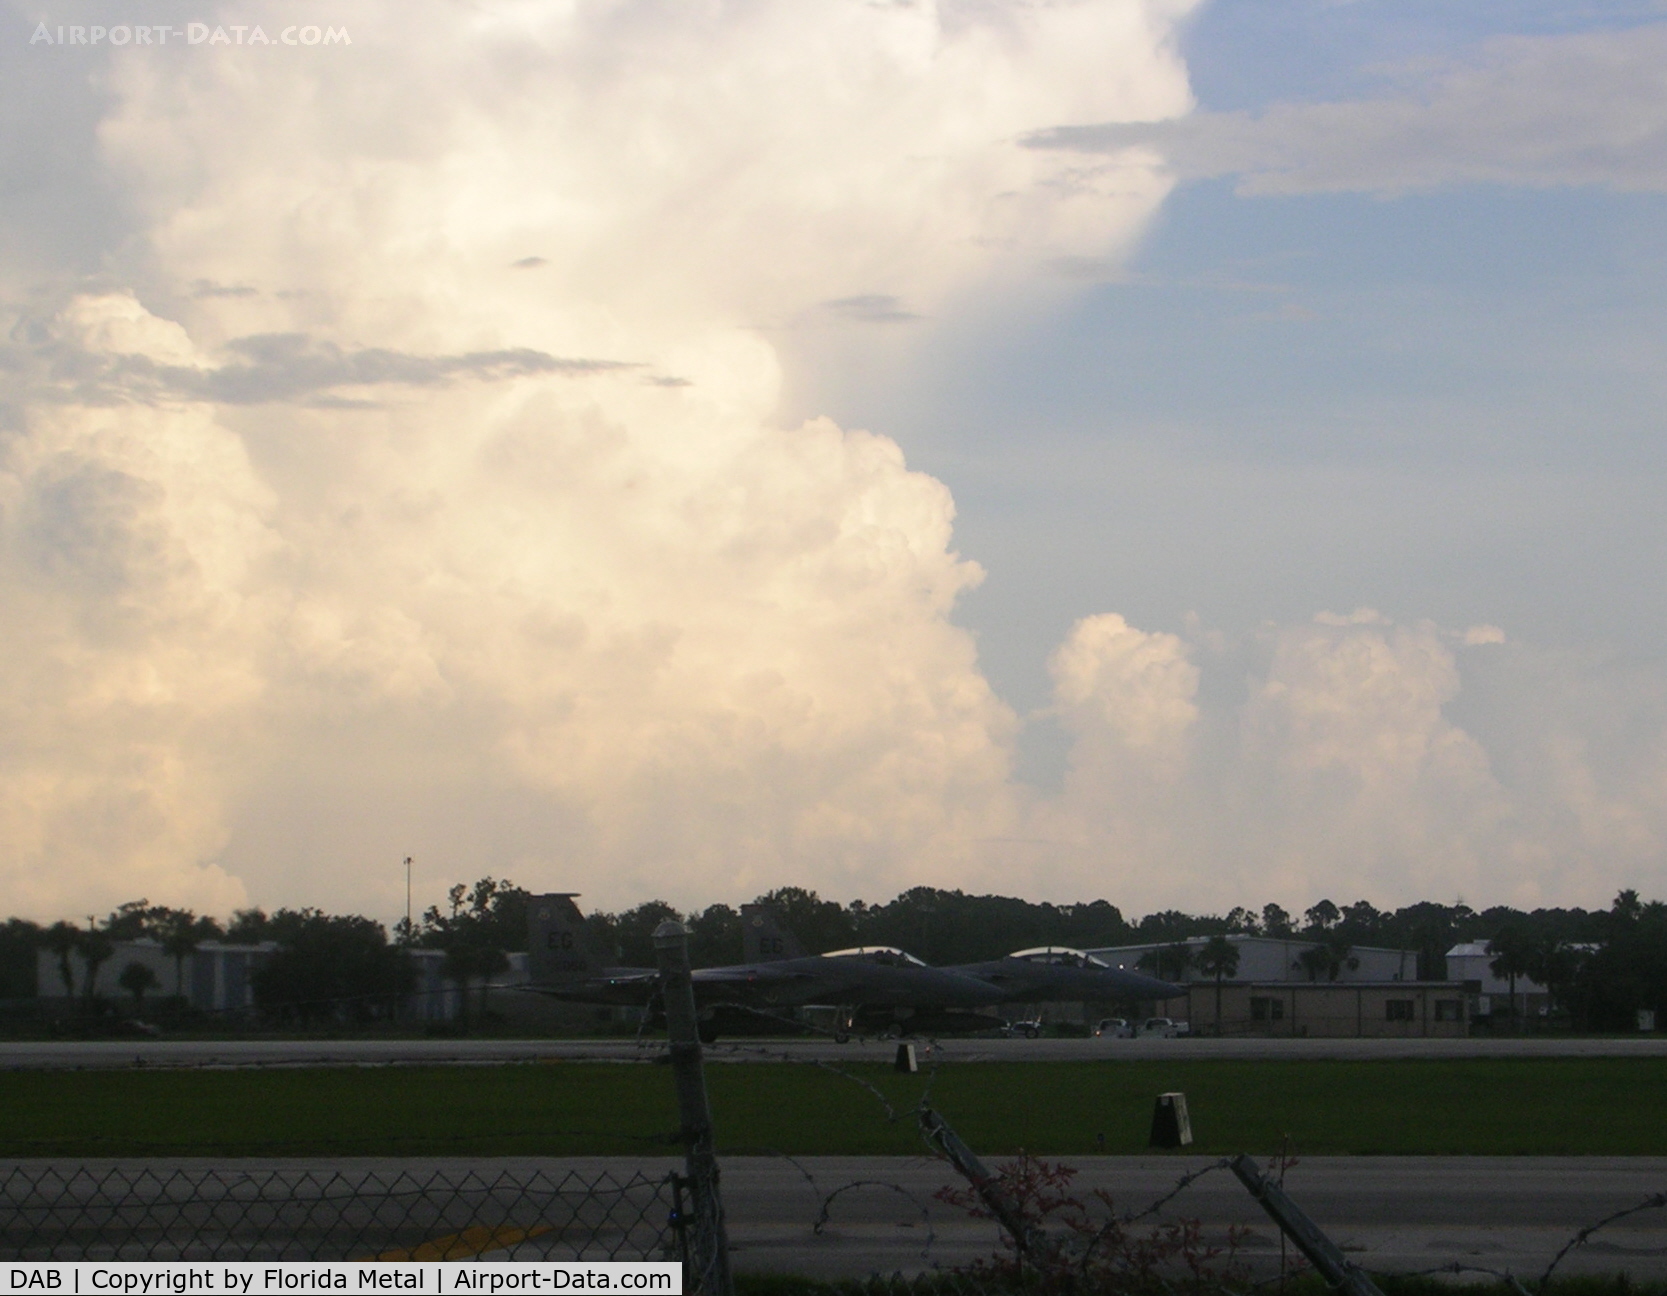 Daytona Beach International Airport (DAB) - F-15s line up with towering storm clouds in background